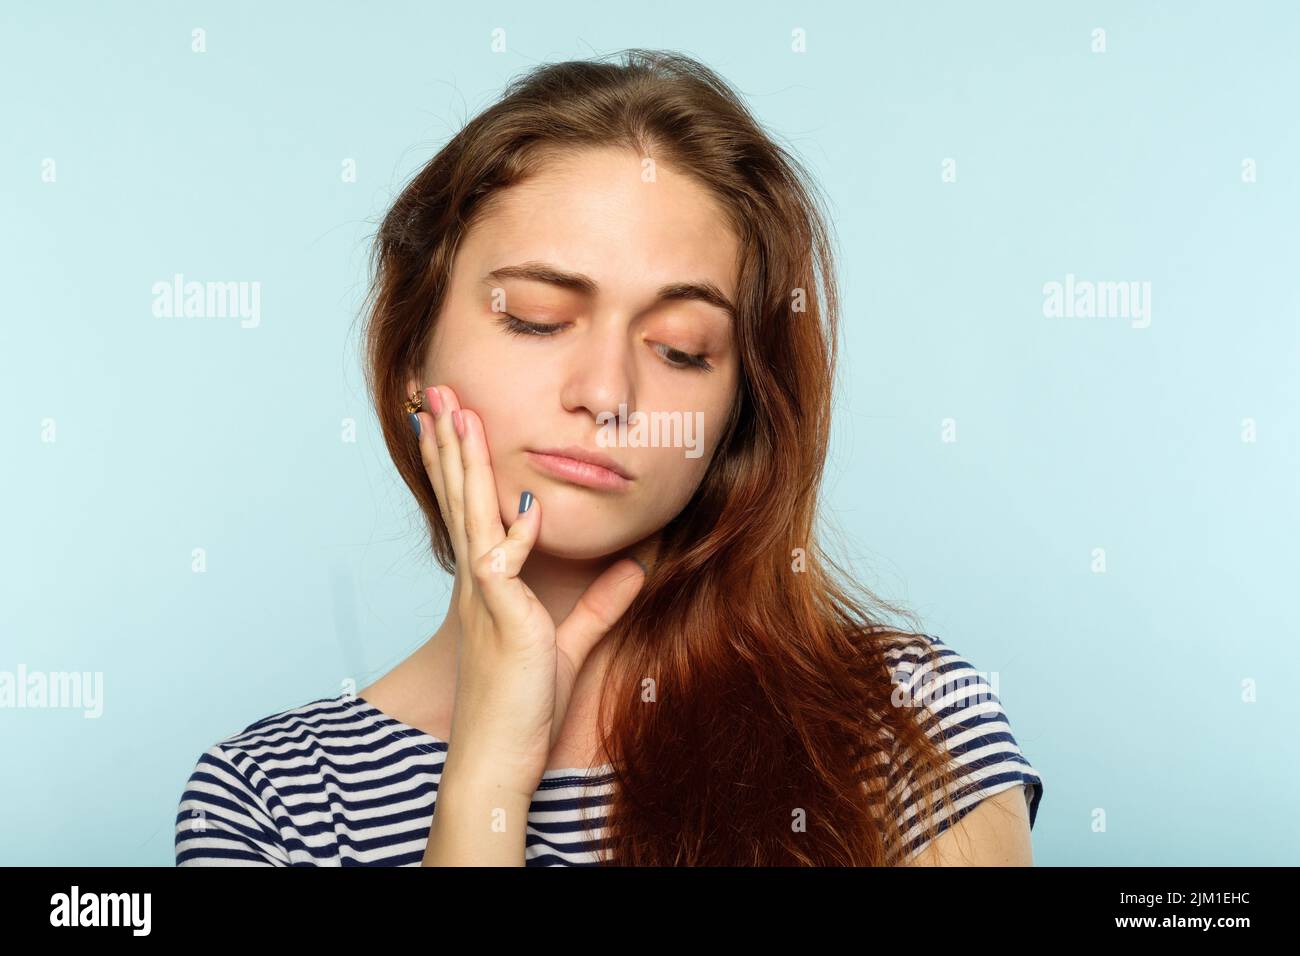 facial expression mood bored indifferent woman Stock Photo